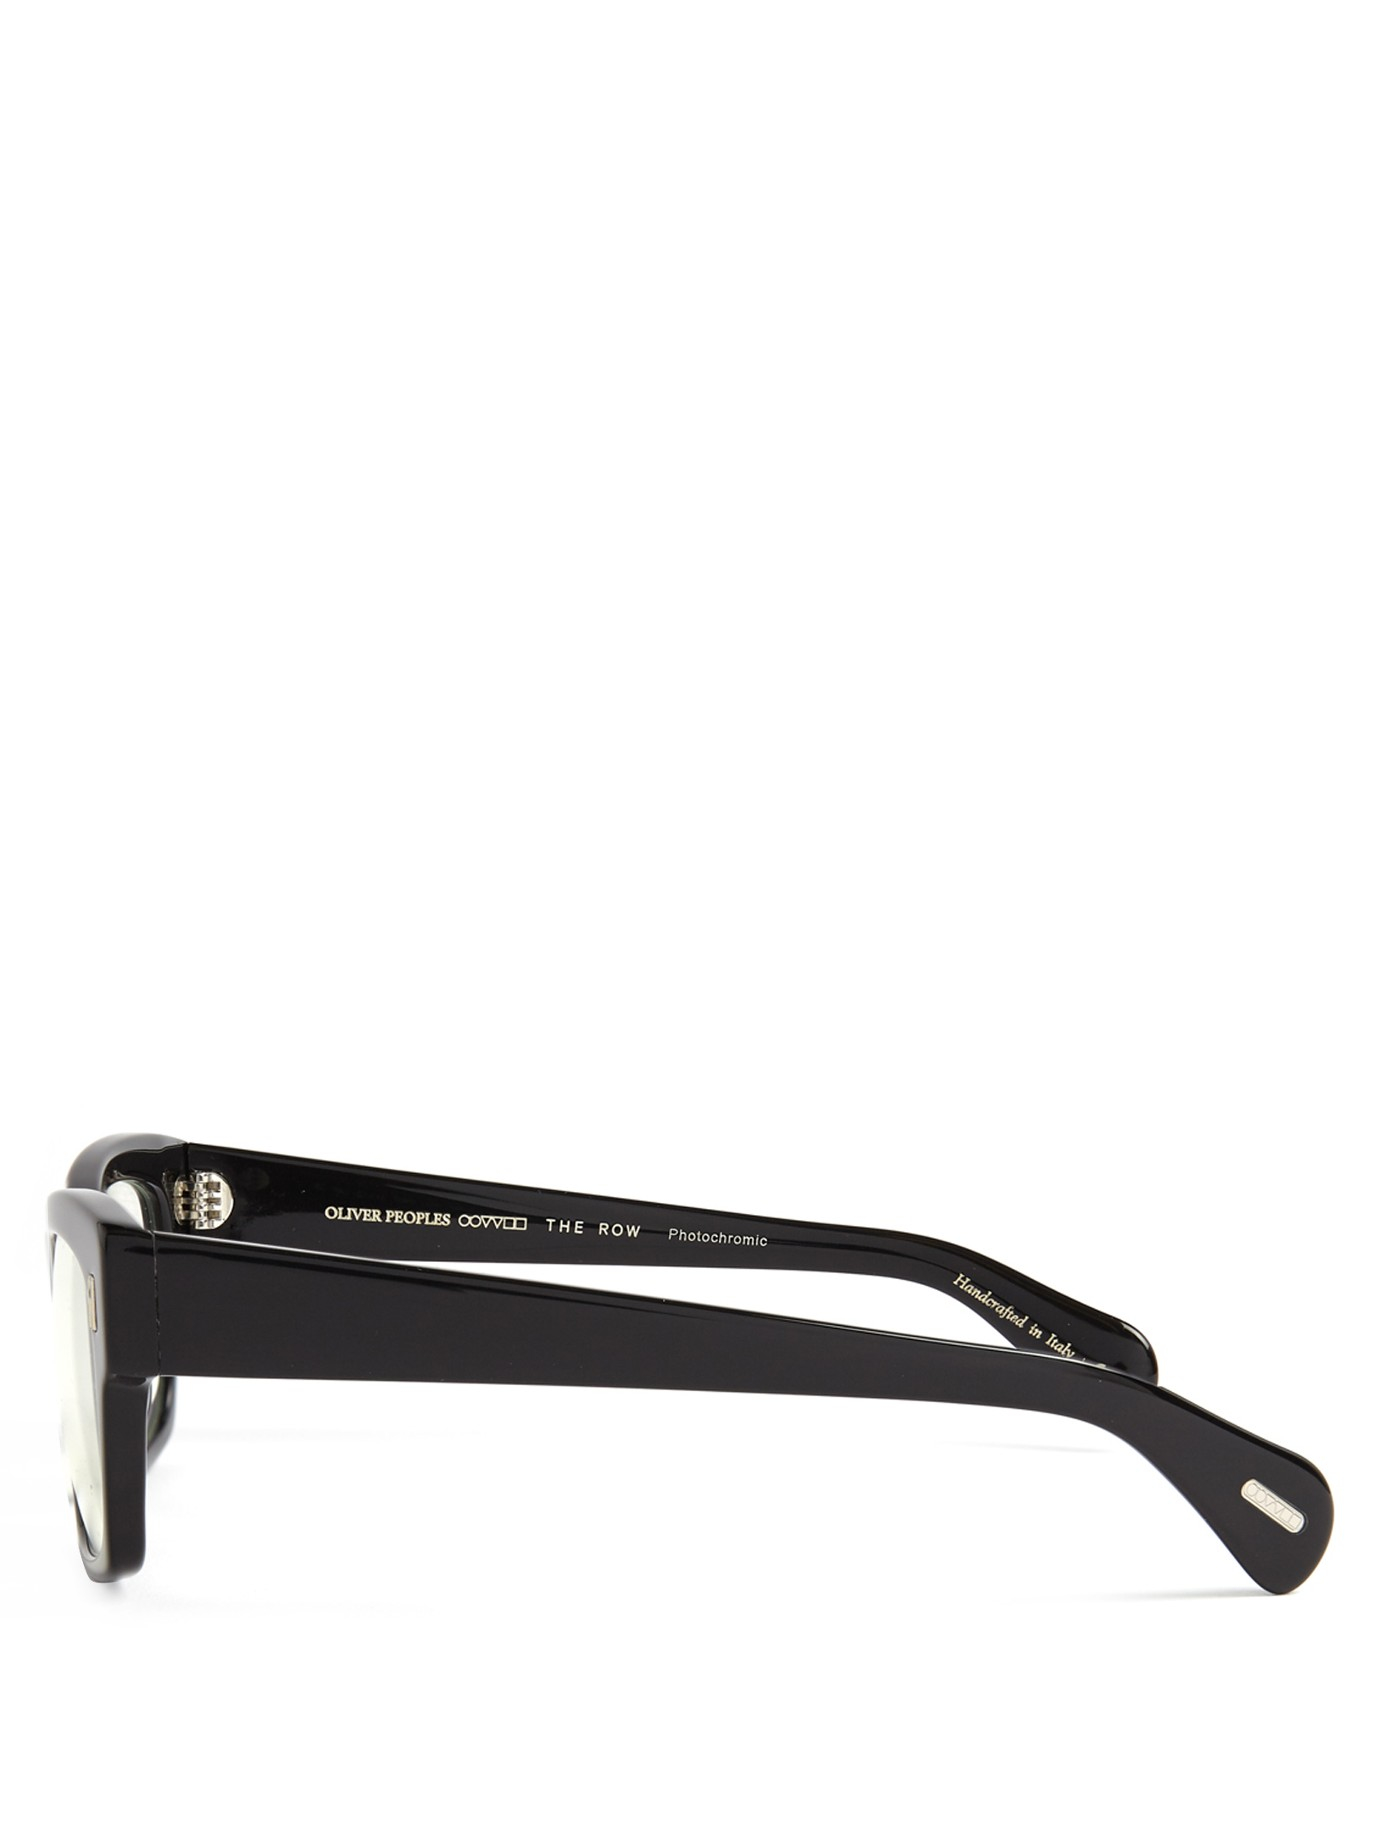 The Row X Oliver Peoples 71st Street Glasses in Black | Lyst